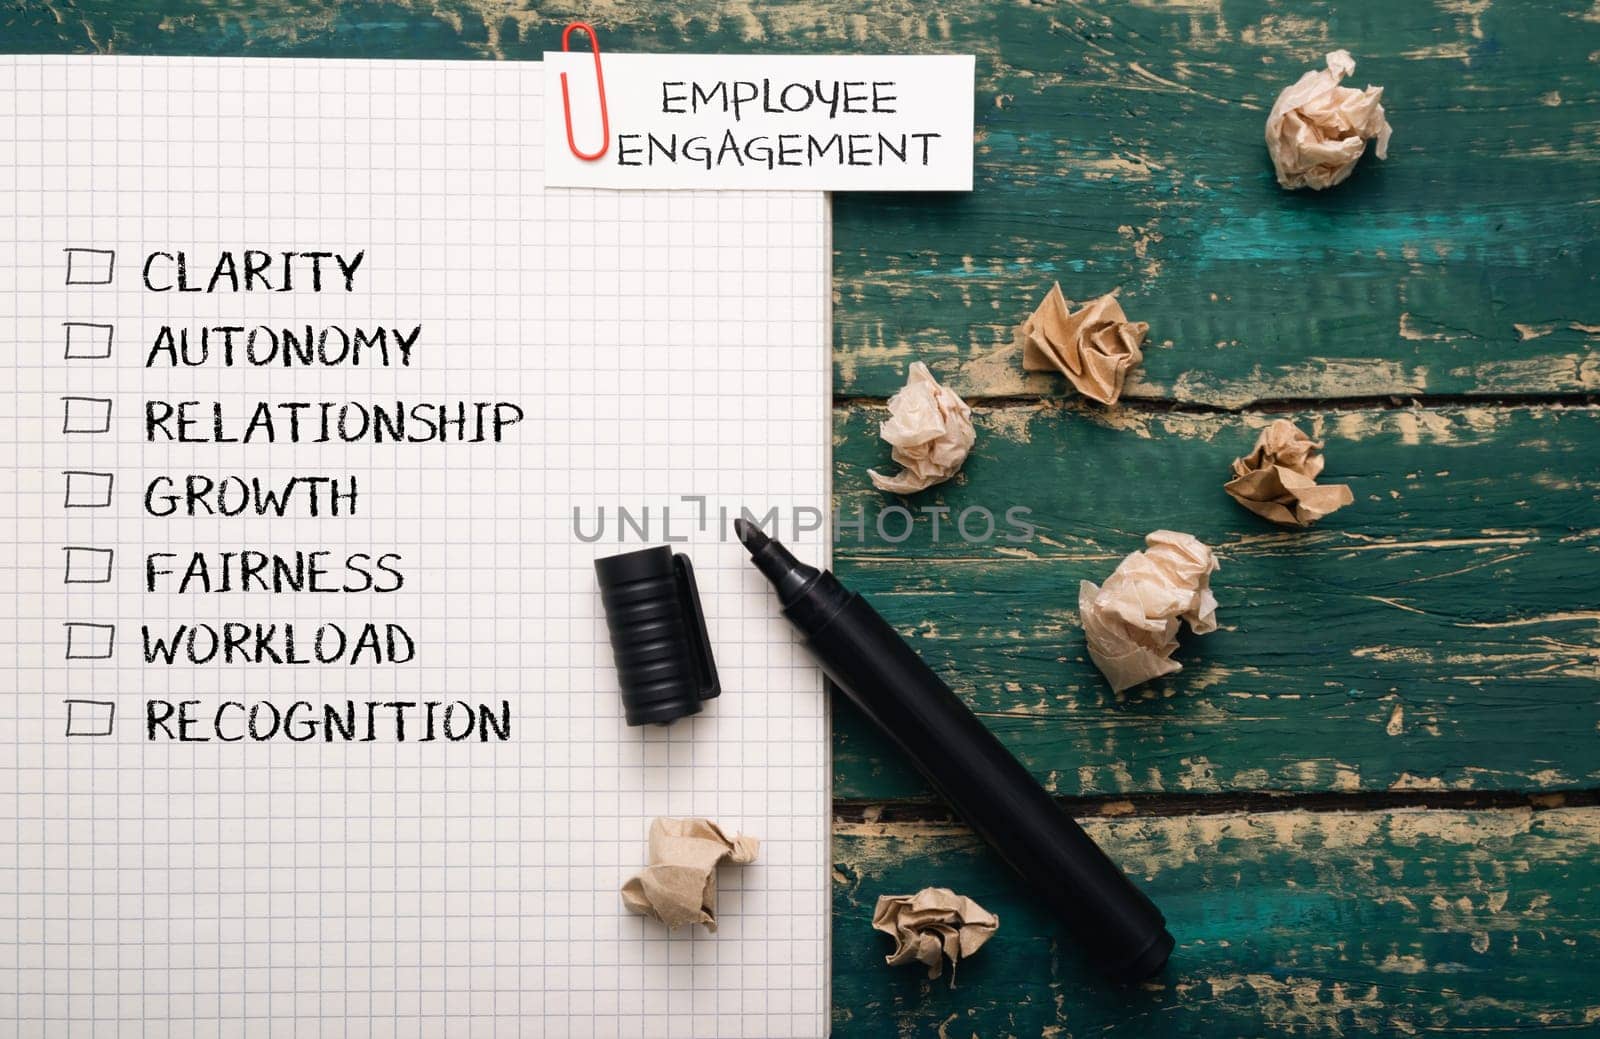 A piece of paper with a list of words and a black marker on it. The words are related to employee engagement